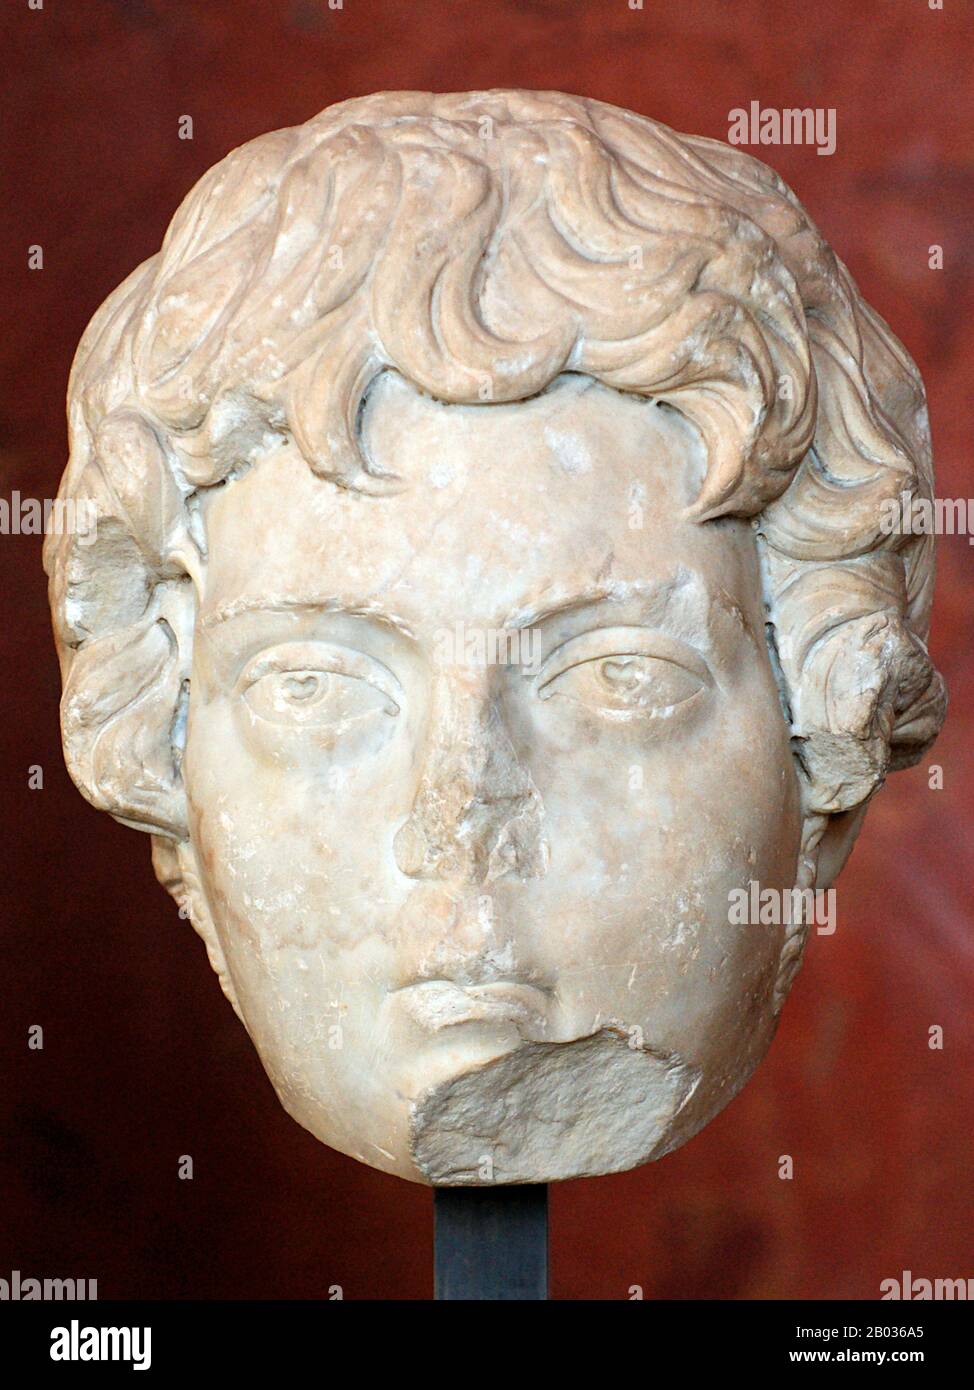 Born as Lucius Septimius Bassianus (188-217 CE) but renamed Marcus Aurelius Antoninus after his father's union with the families of the Nerva-Antonine dynasty, he gained his agnomen Caracalla from a Gallic hooded tunic which he often wore. Eldest son of Emperor Septimius Severus, he reigned jointly with his father from 198 CE until his father's death in 211 CE. He then became joint emperor with his younger brother Geta, but he quickly murdered his brother less than a year into their joint rule.  Caracalla's reign was marked by continued assaults from the Germanic peoples as well as constant do Stock Photo